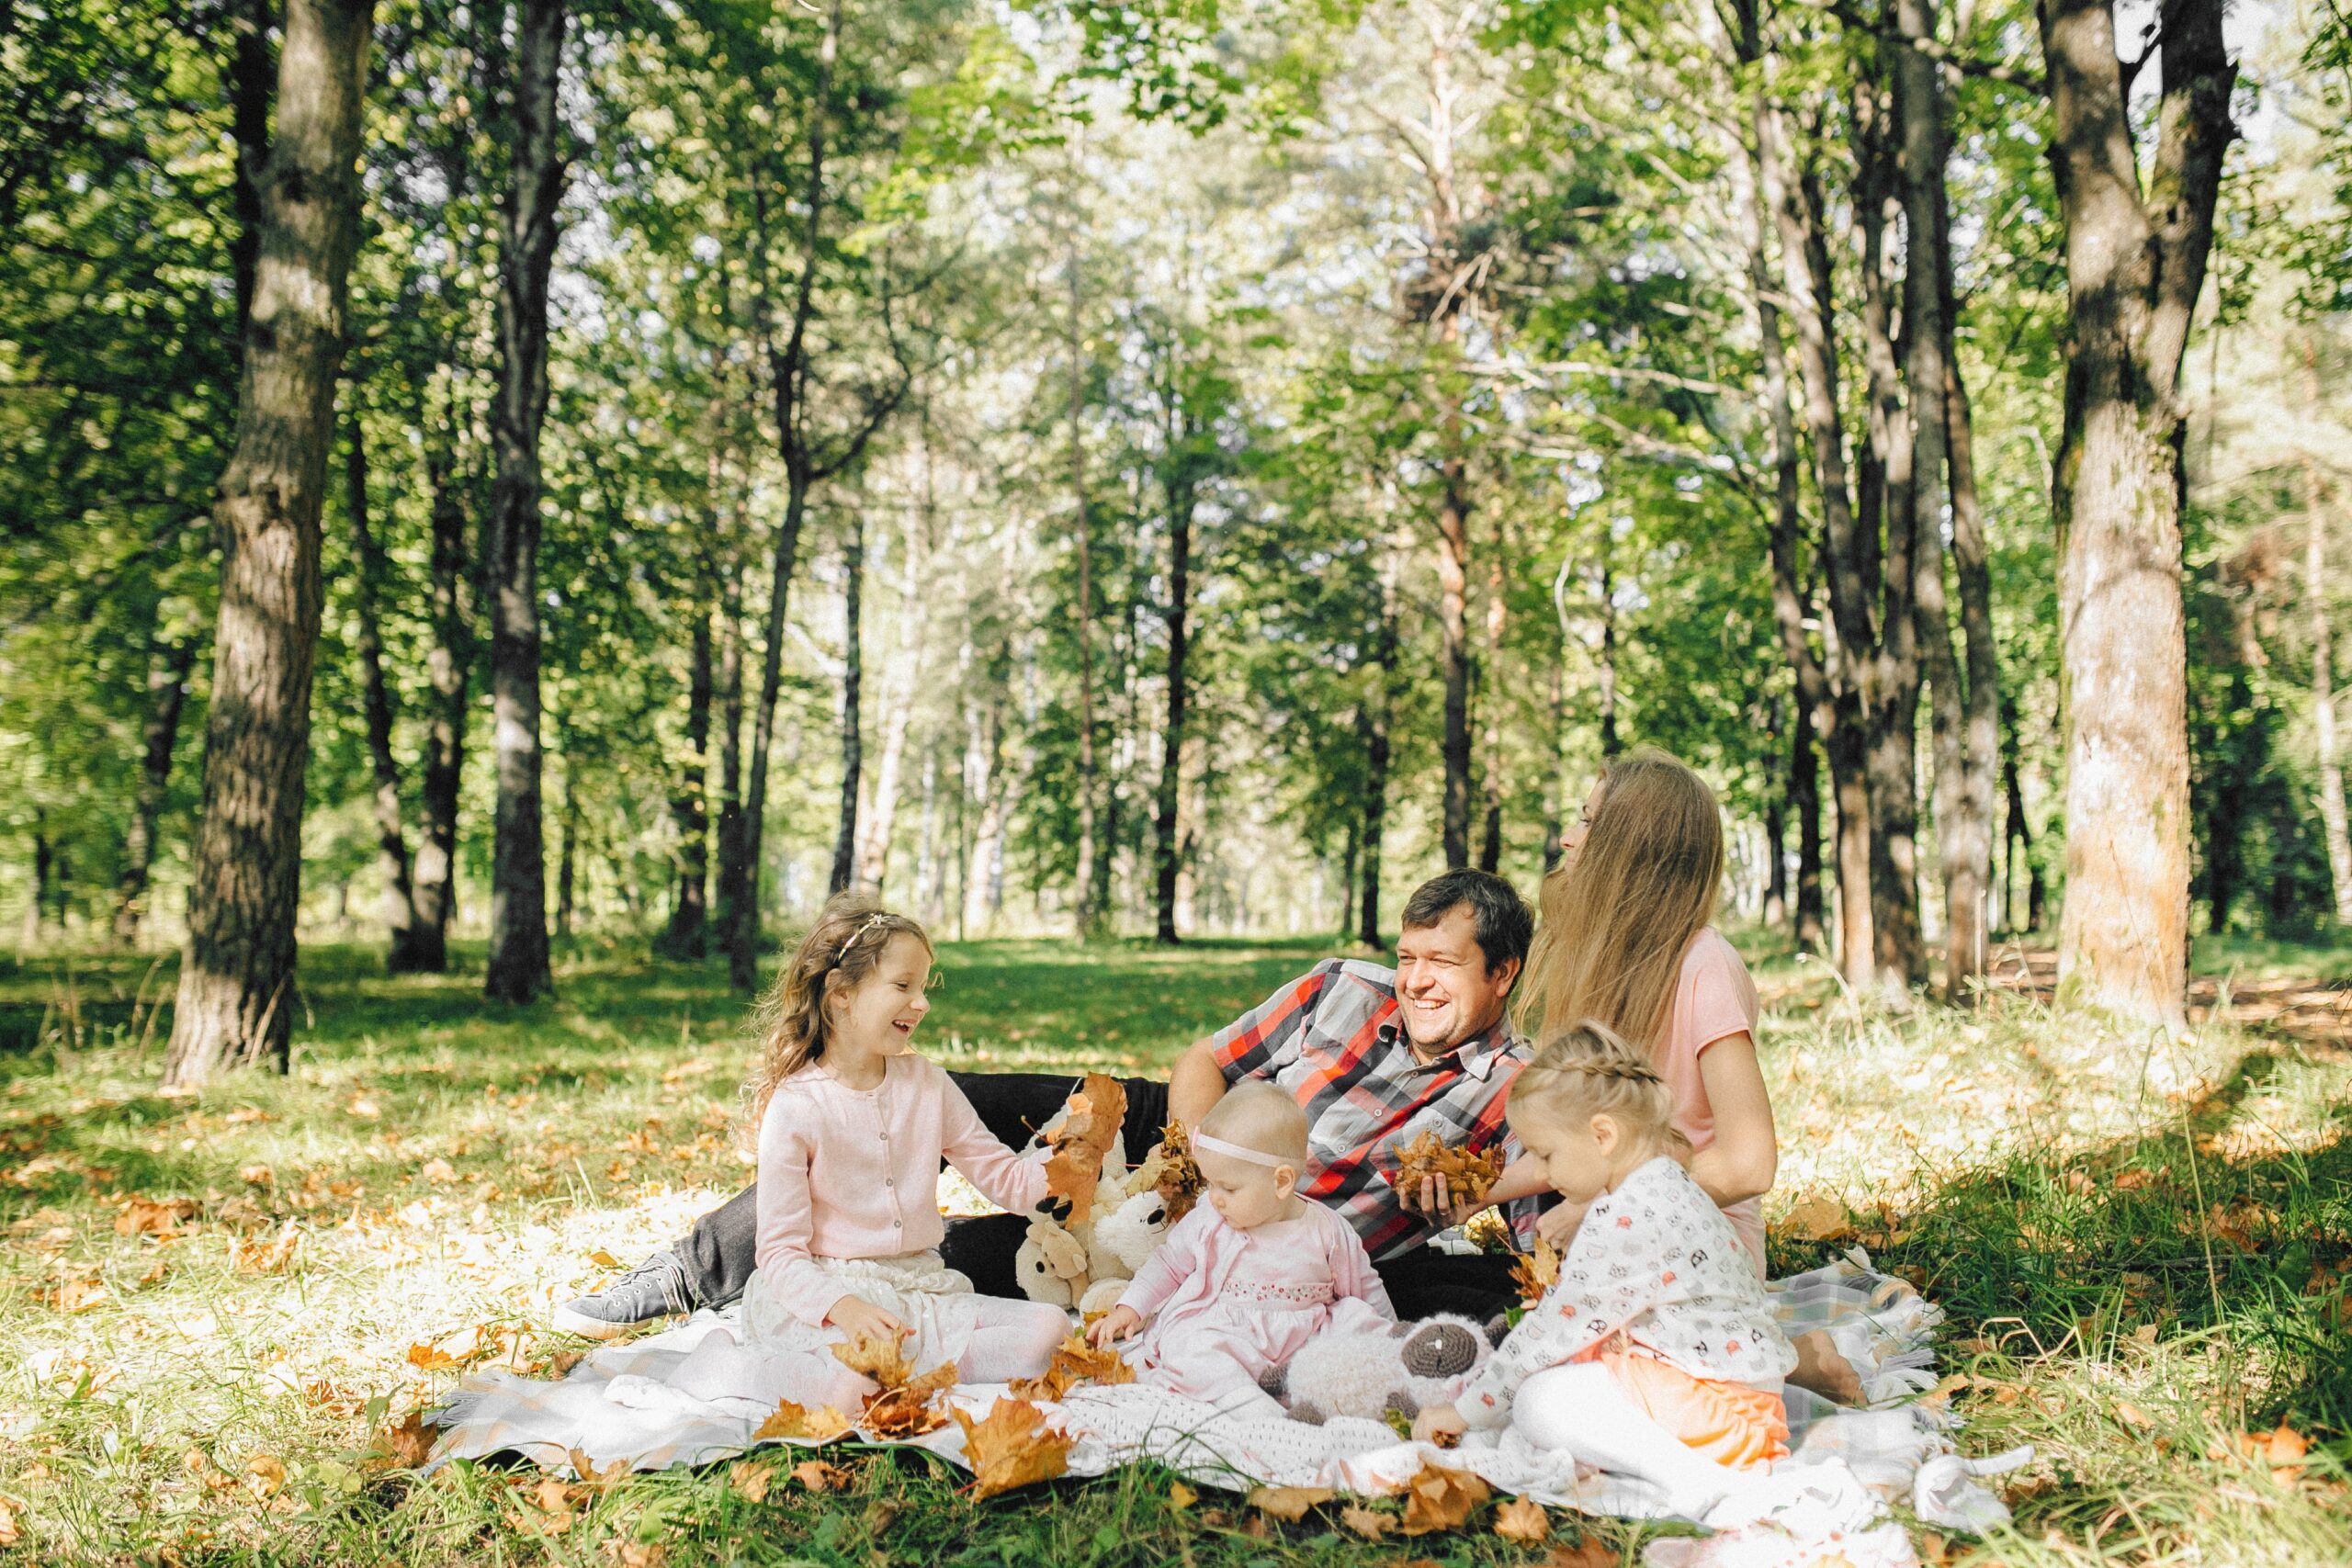 A man having a picnic with his granddaughters - The Guide to Giving Experiences as Gifts